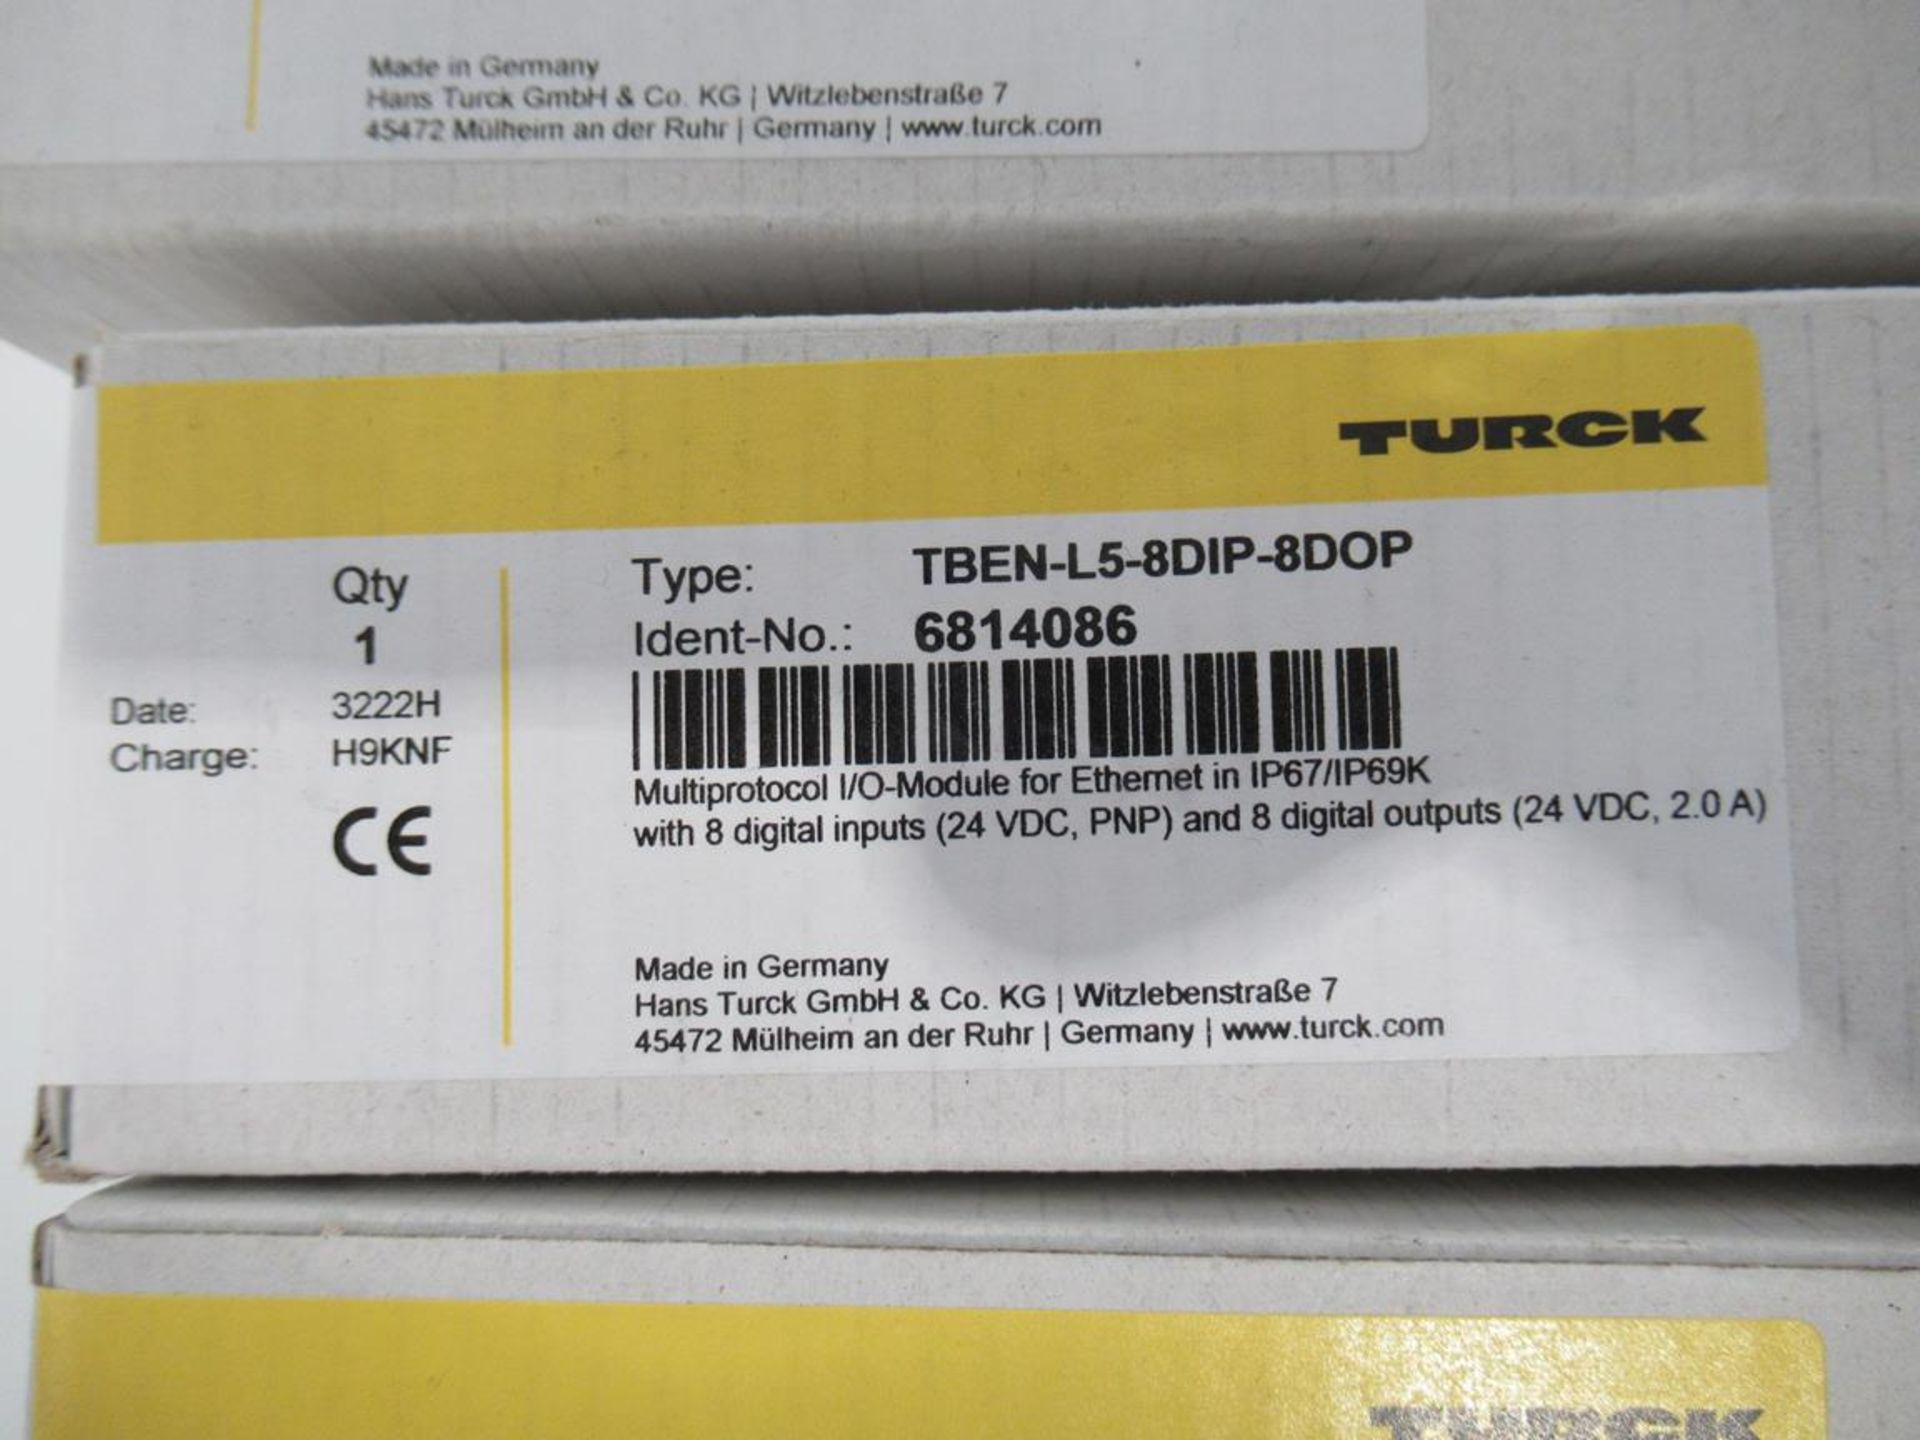 Box Turck, TBEN-L5-8DIP-8DOP ethernet 1/0 (boxed and unused)